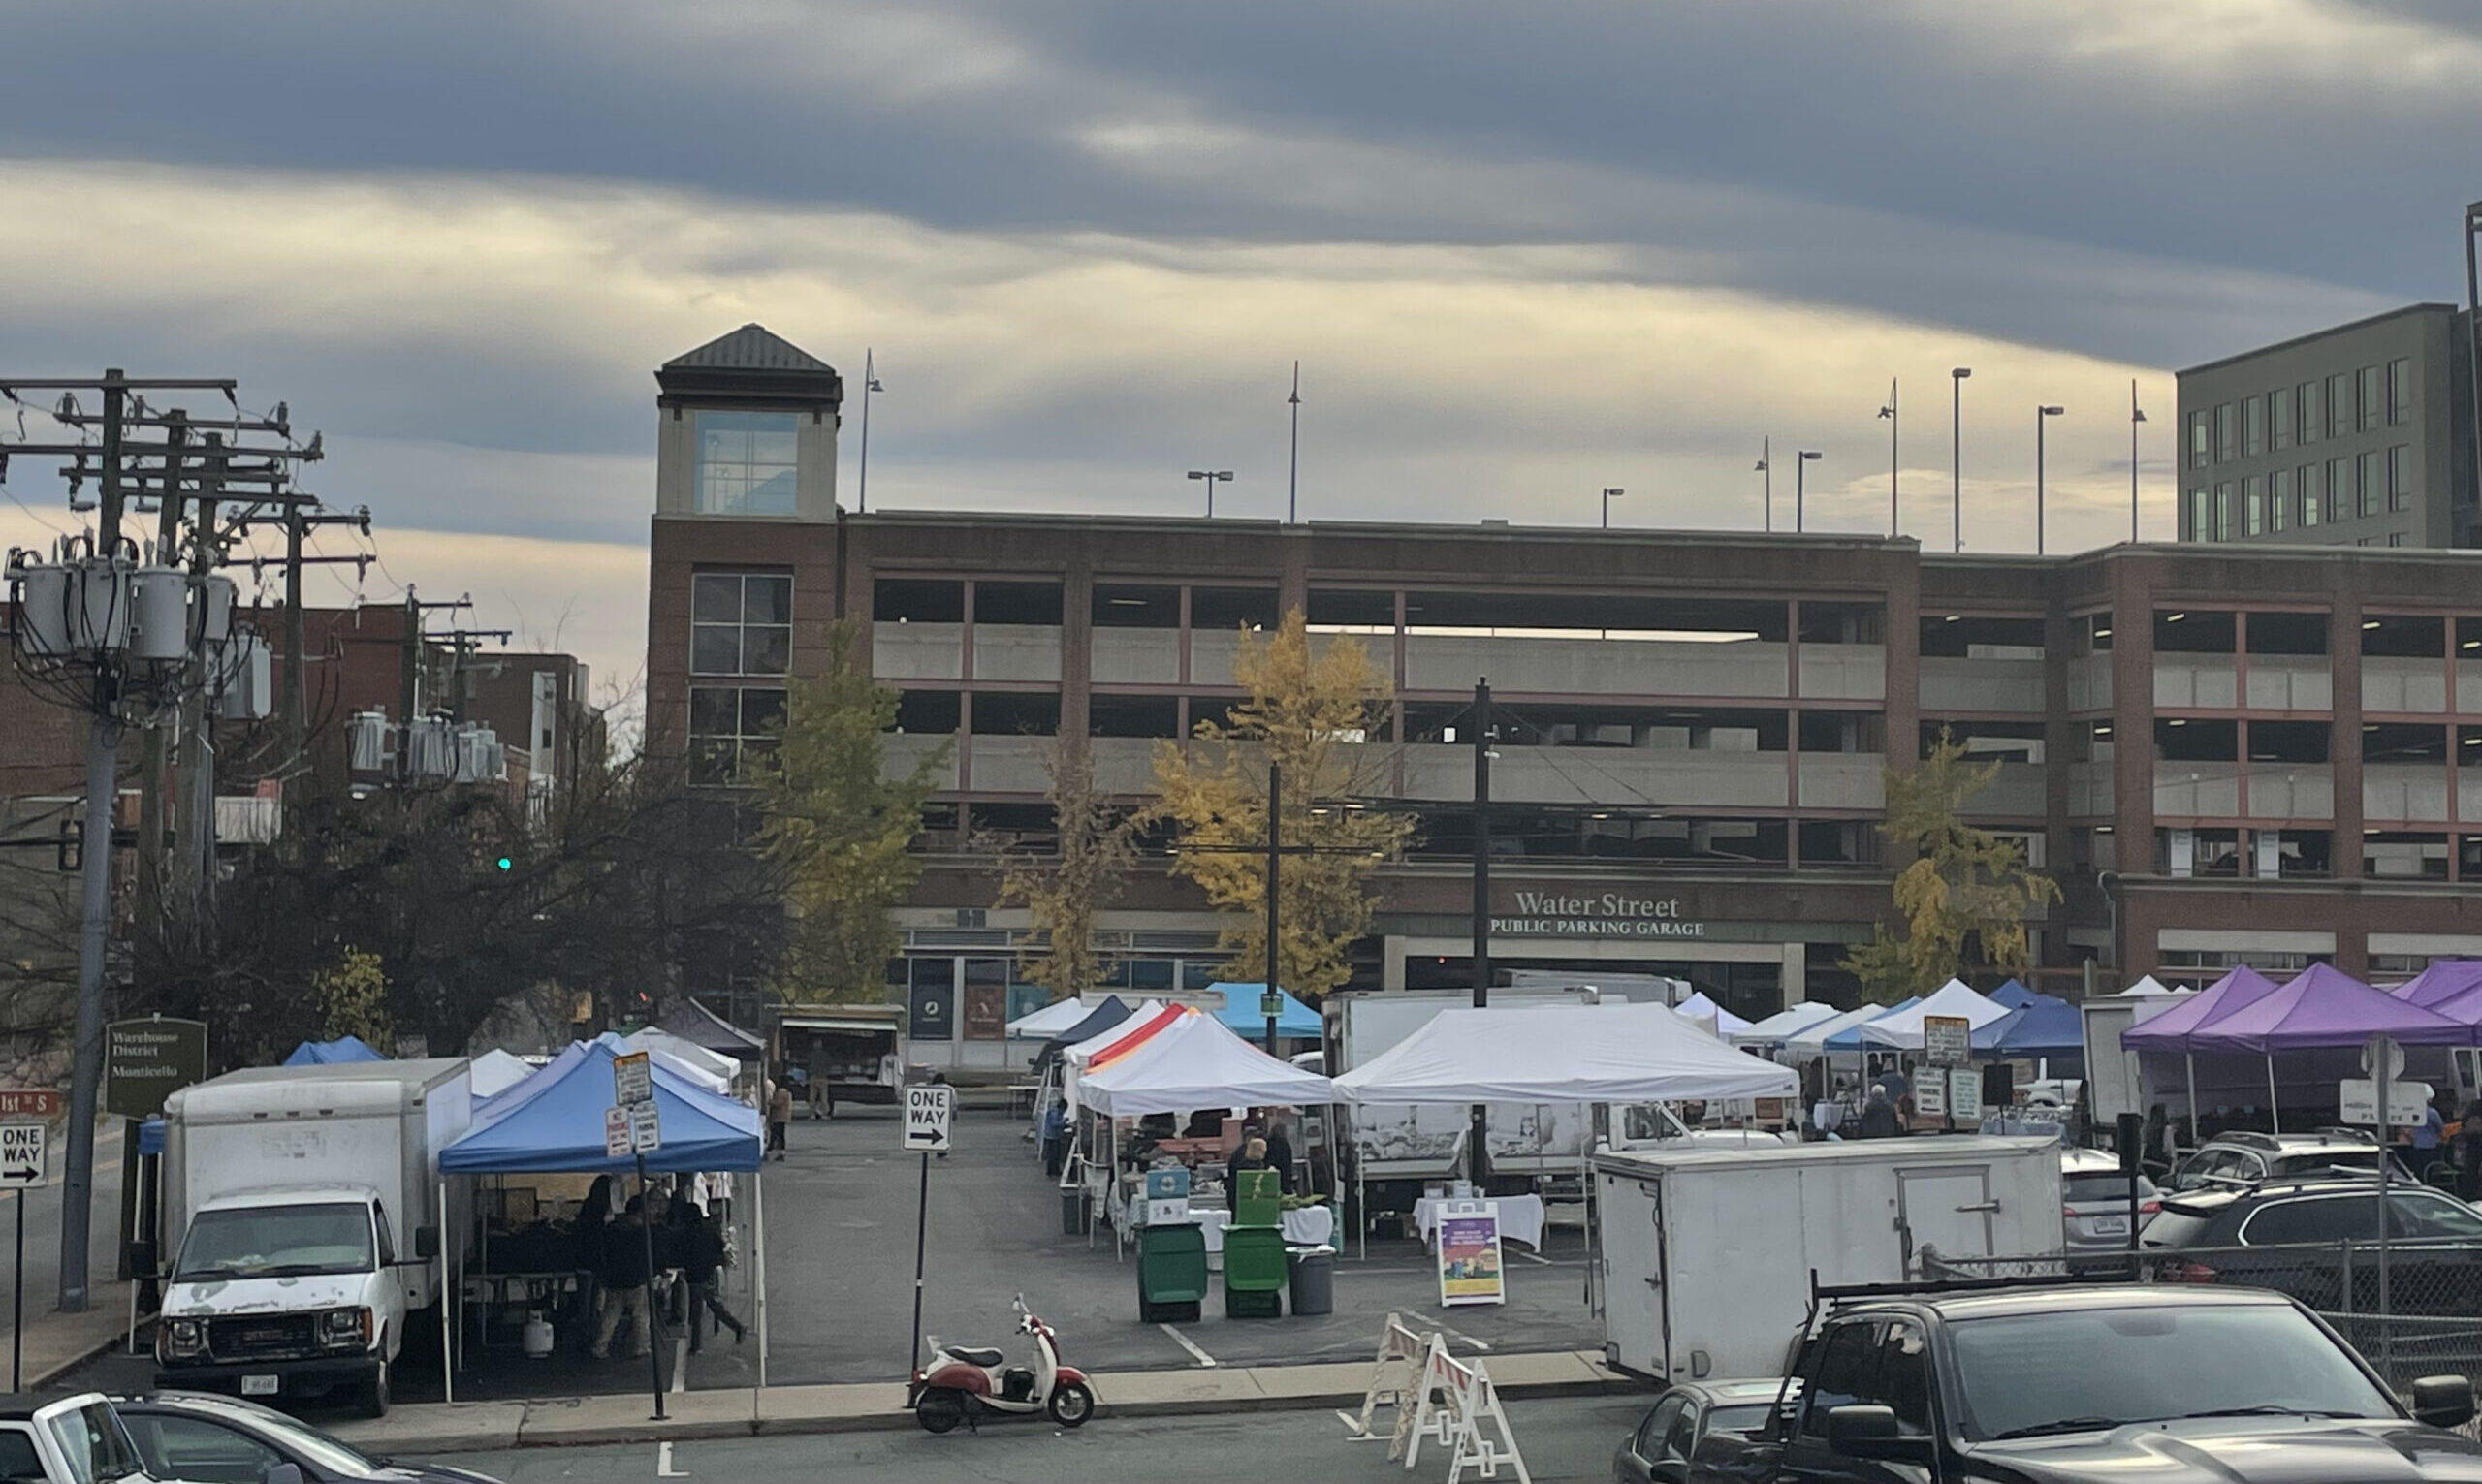 Tents for a farmers market in a parking lot in front of a brick parking garage